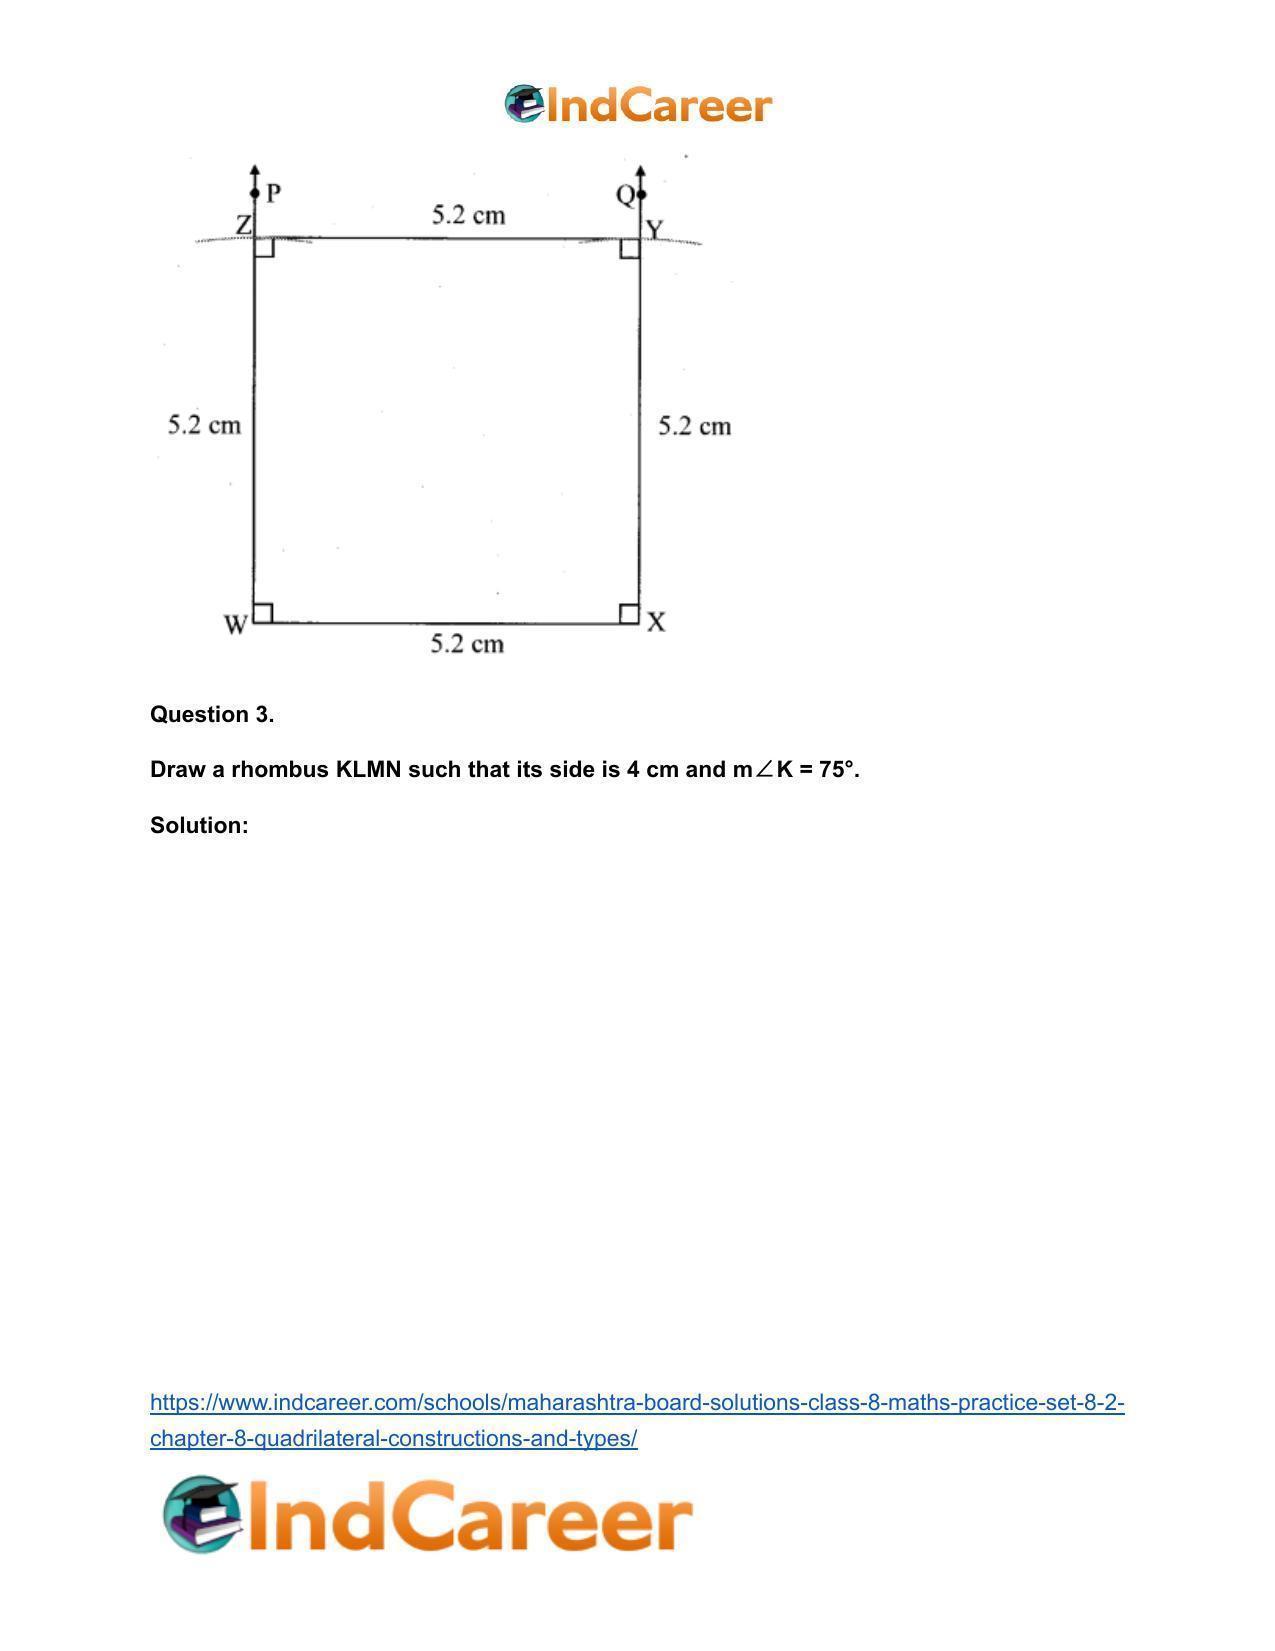 Maharashtra Board Solutions Class 8-Maths (Practice Set 8.2): Chapter 8- Quadrilateral: Constructions and Types - Page 4